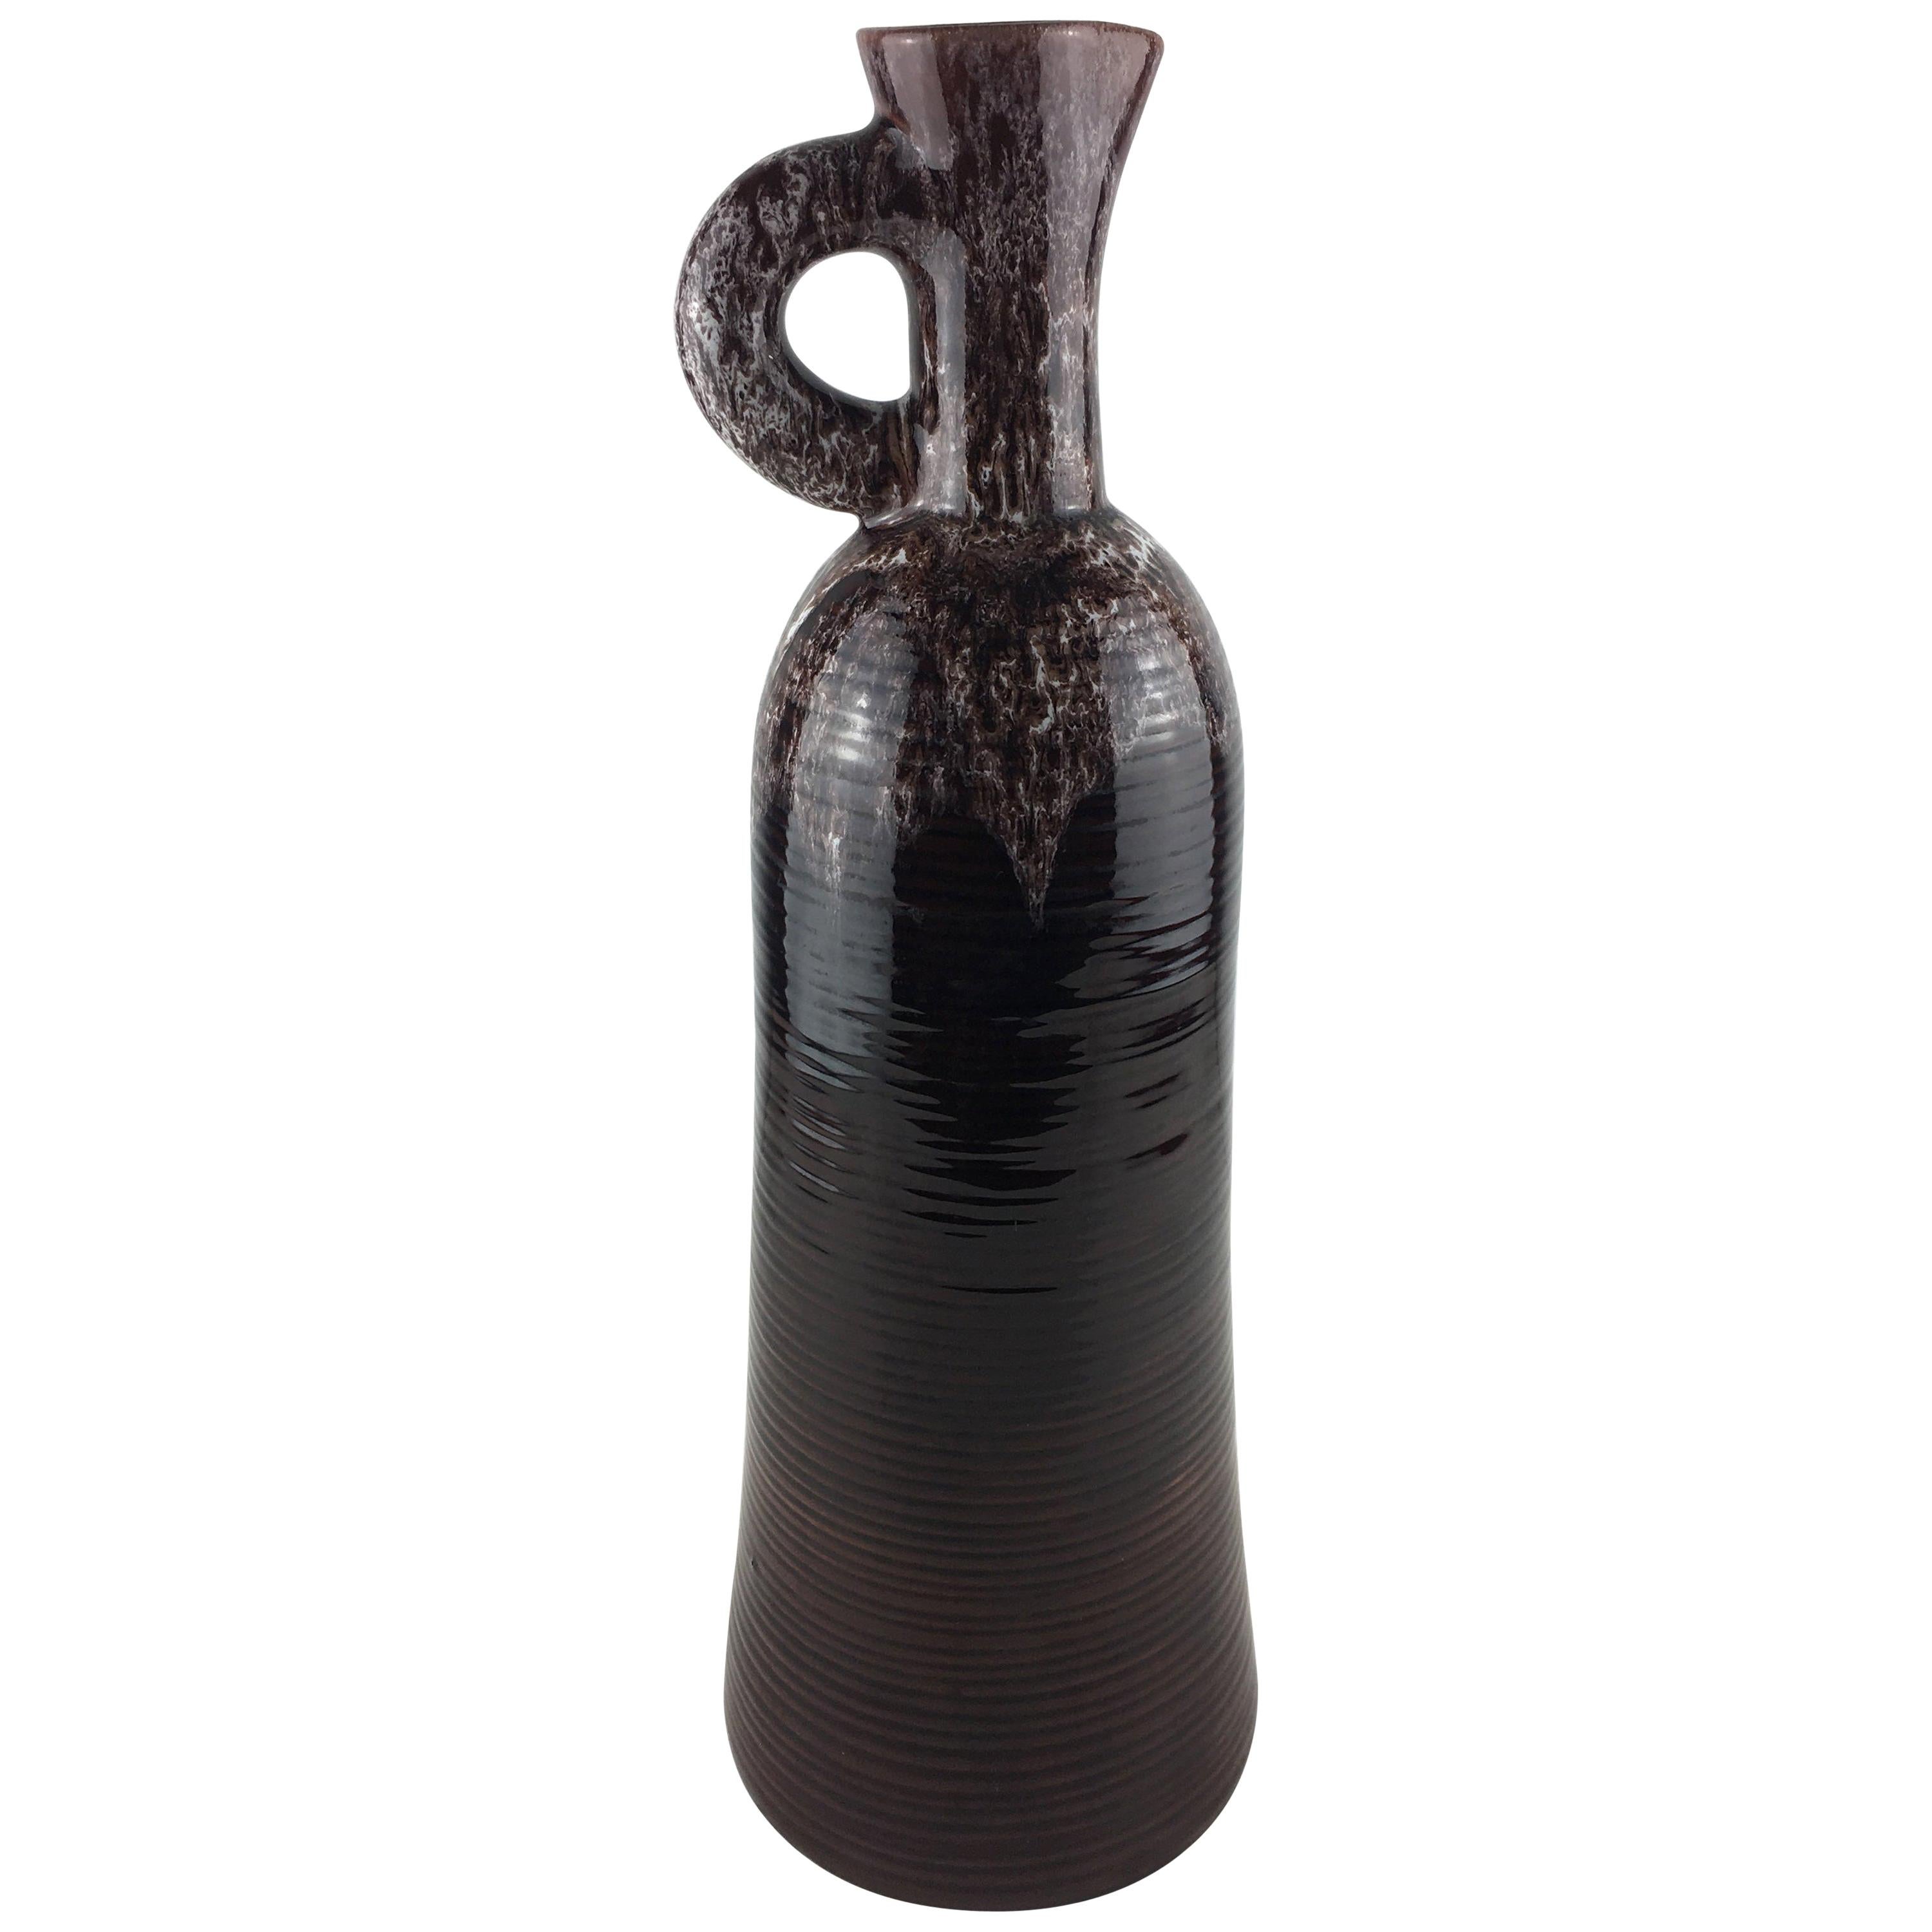 Accolay French Ceramic Handled Vase or Pitcher